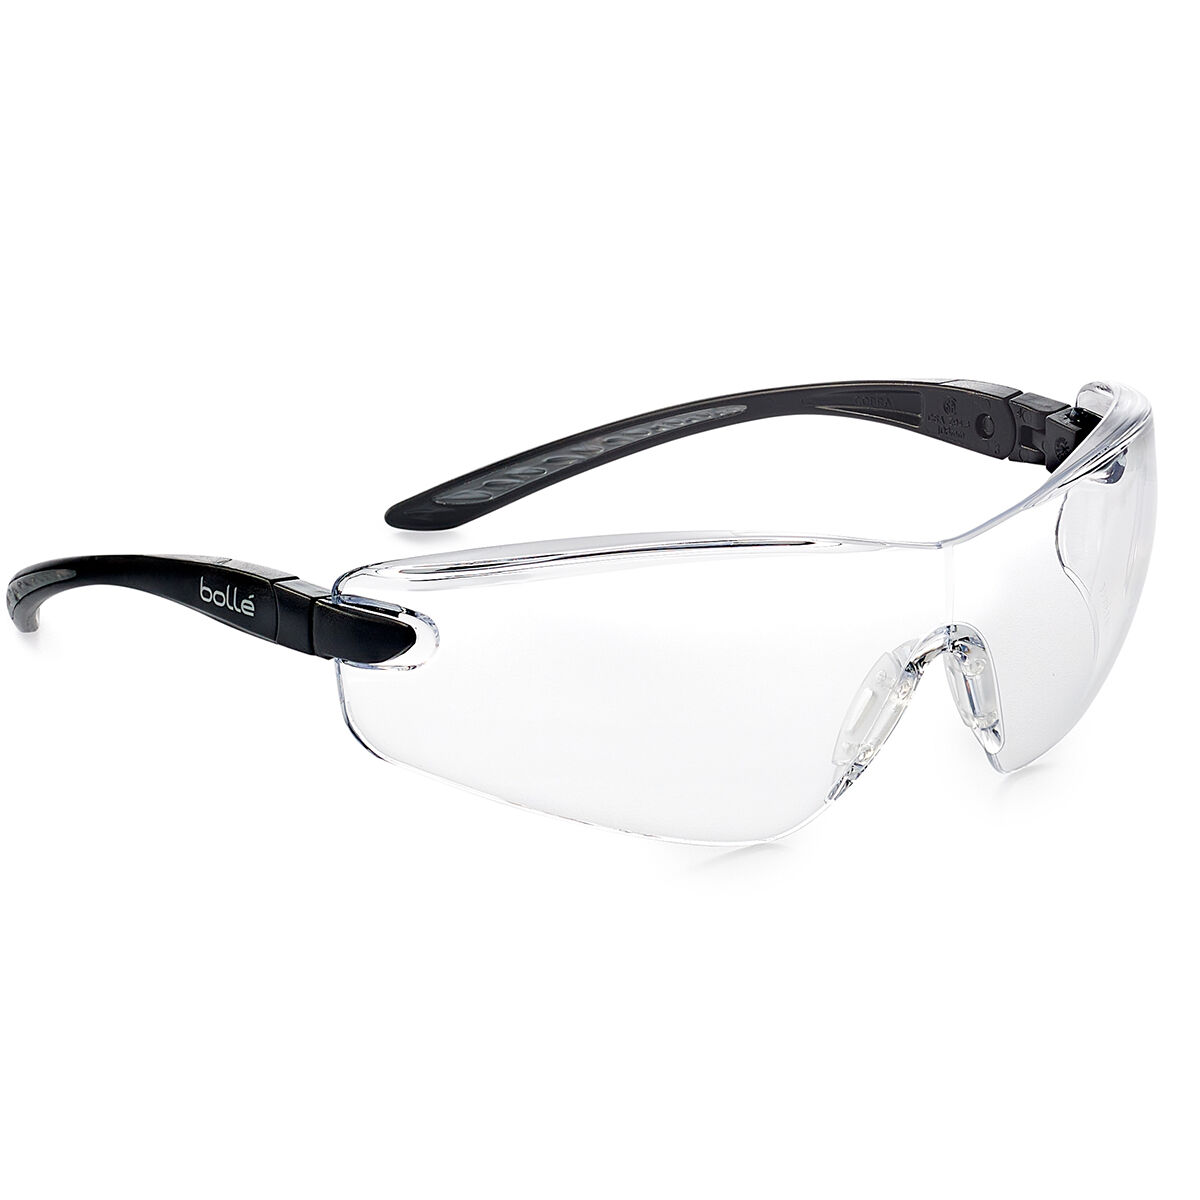 FREE Shipping! The Safety Director QTY 2 Dark Tint Safety Glasses 